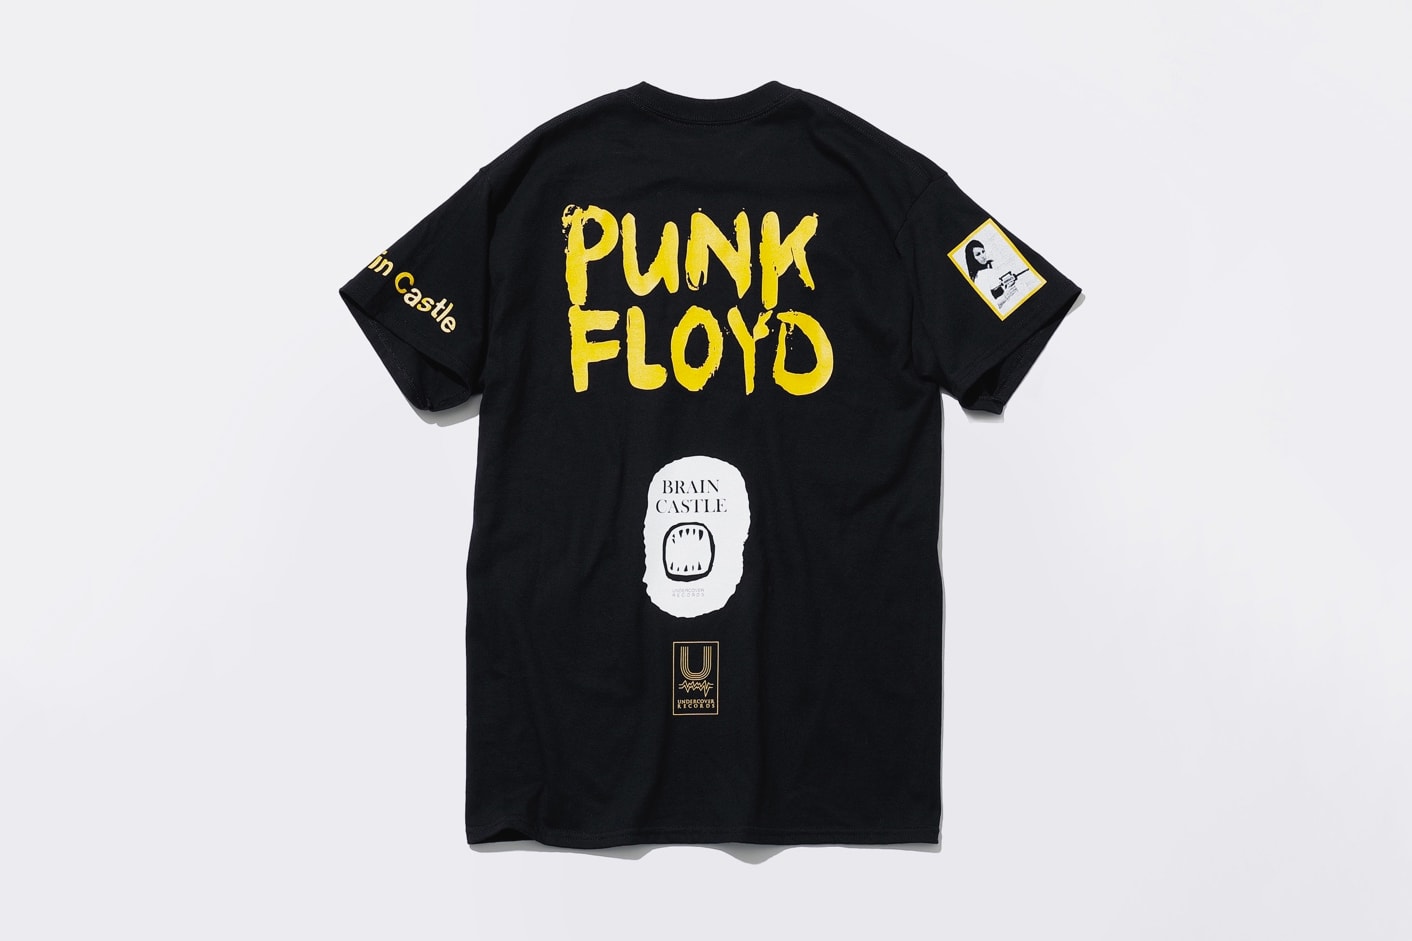 UNDERCOVER RECORDS 新作第一弾は CAN と架空のバンド PUNK FLOYD の関連グッズ